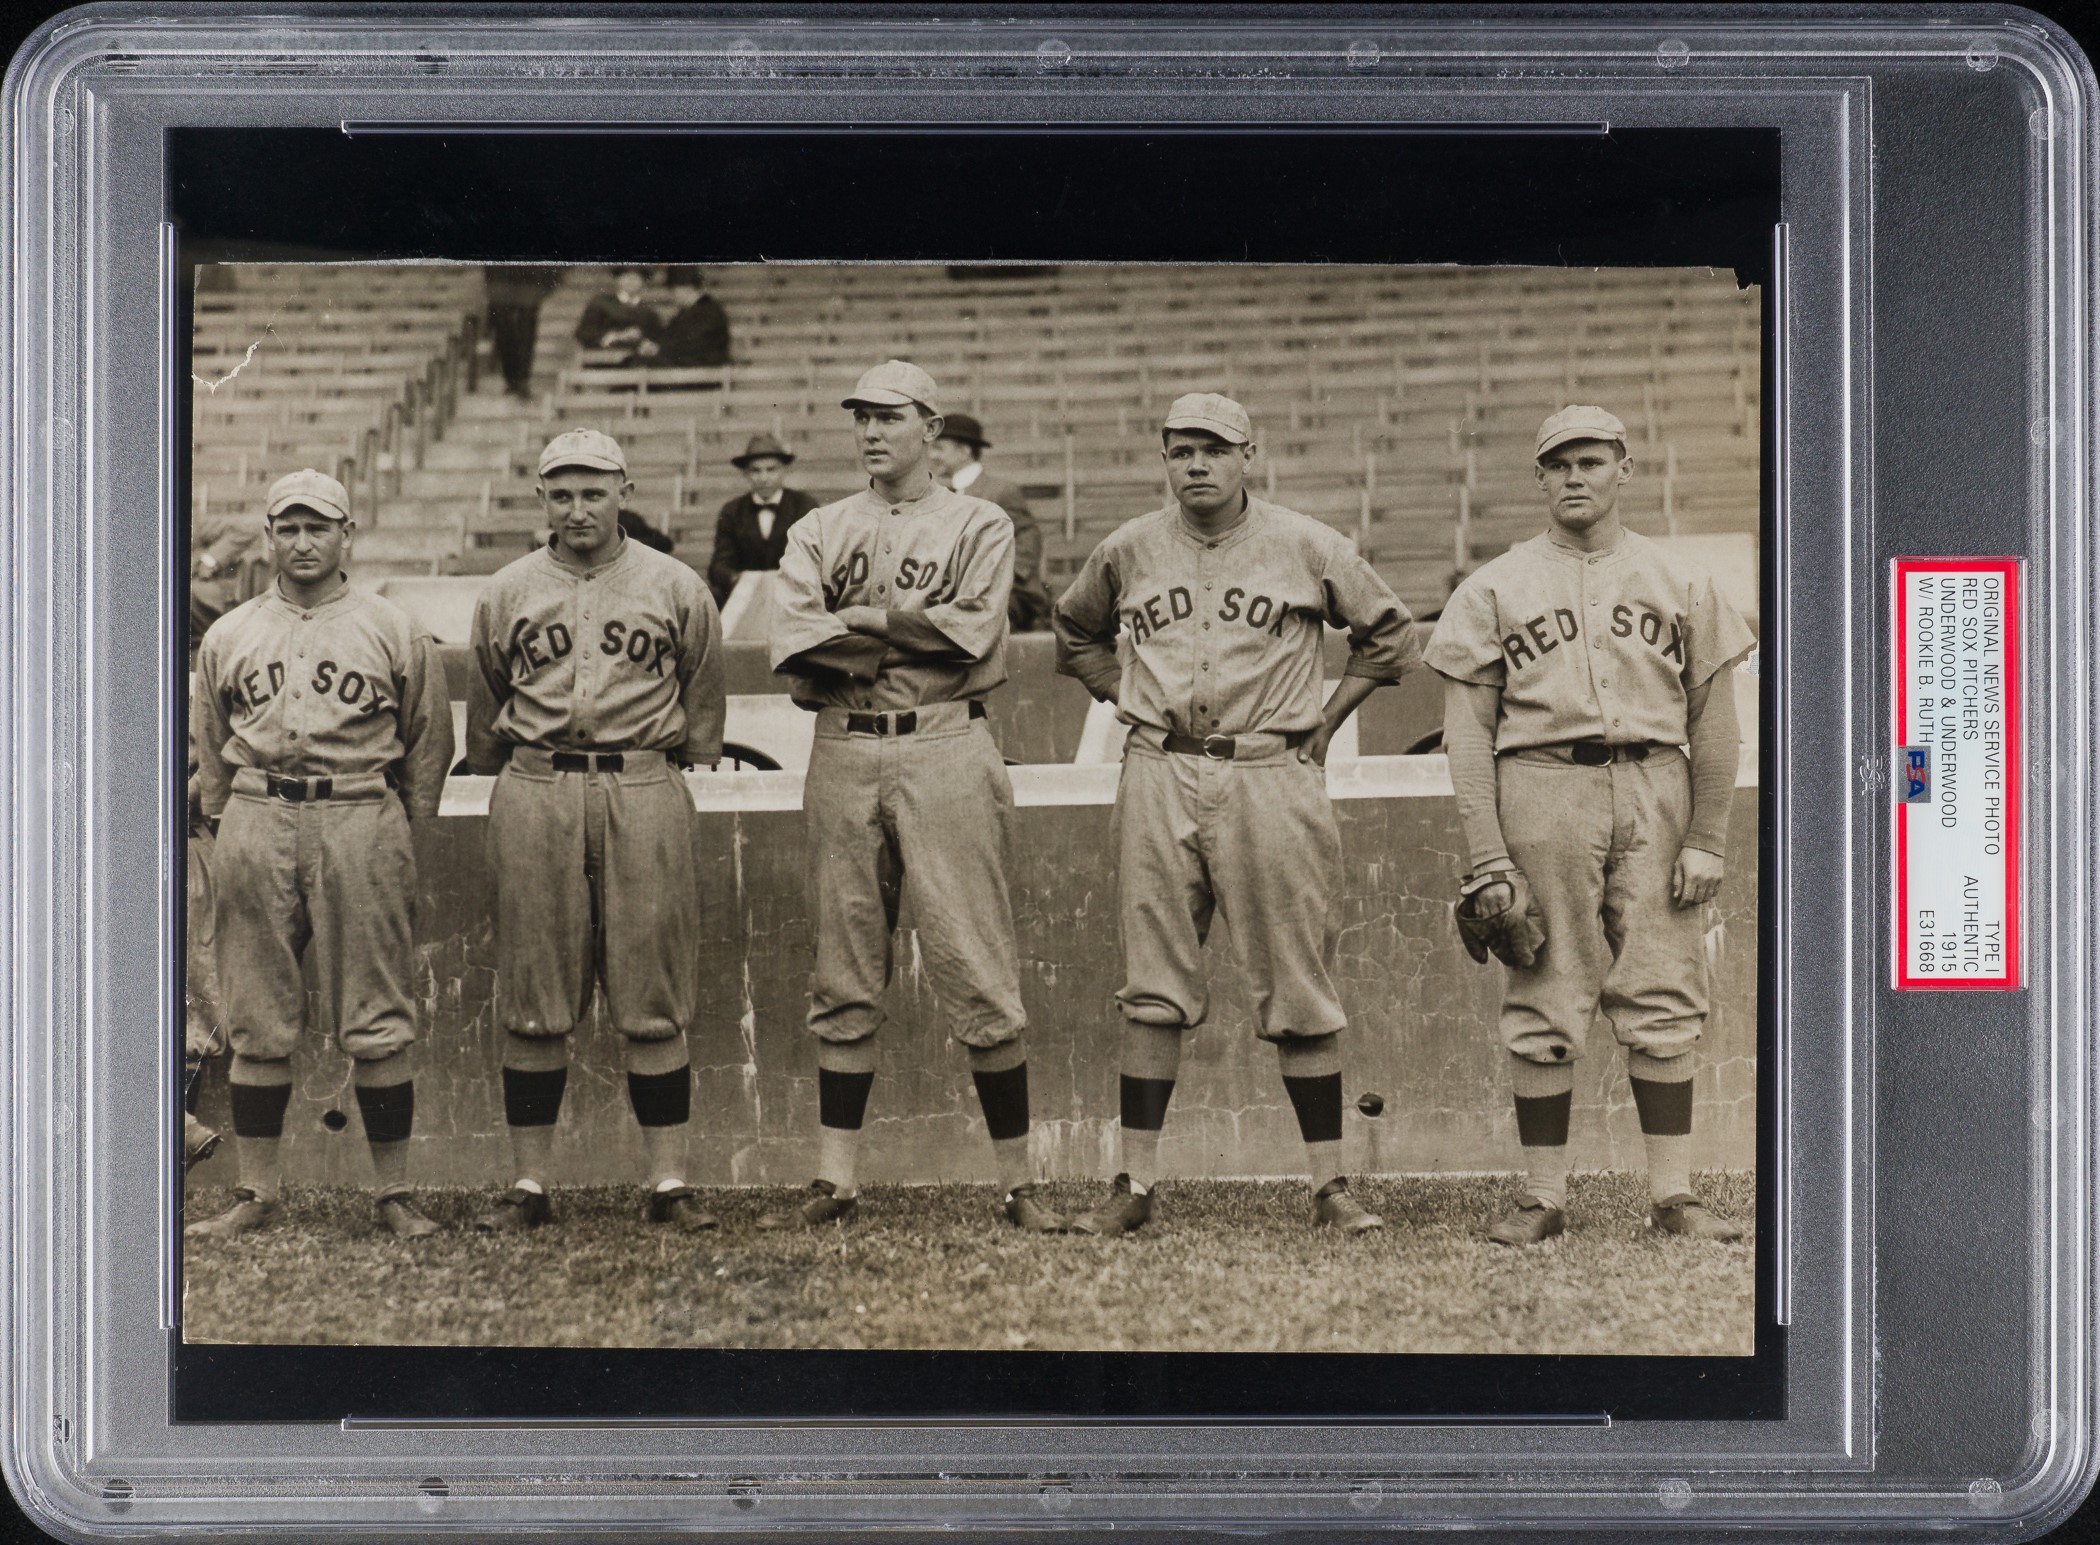 Hake's - 1915 BOSTON RED SOX SPRING TRAINING PHOTO WITH BABE RUTH IN HIS  ROOKIE SEASON.